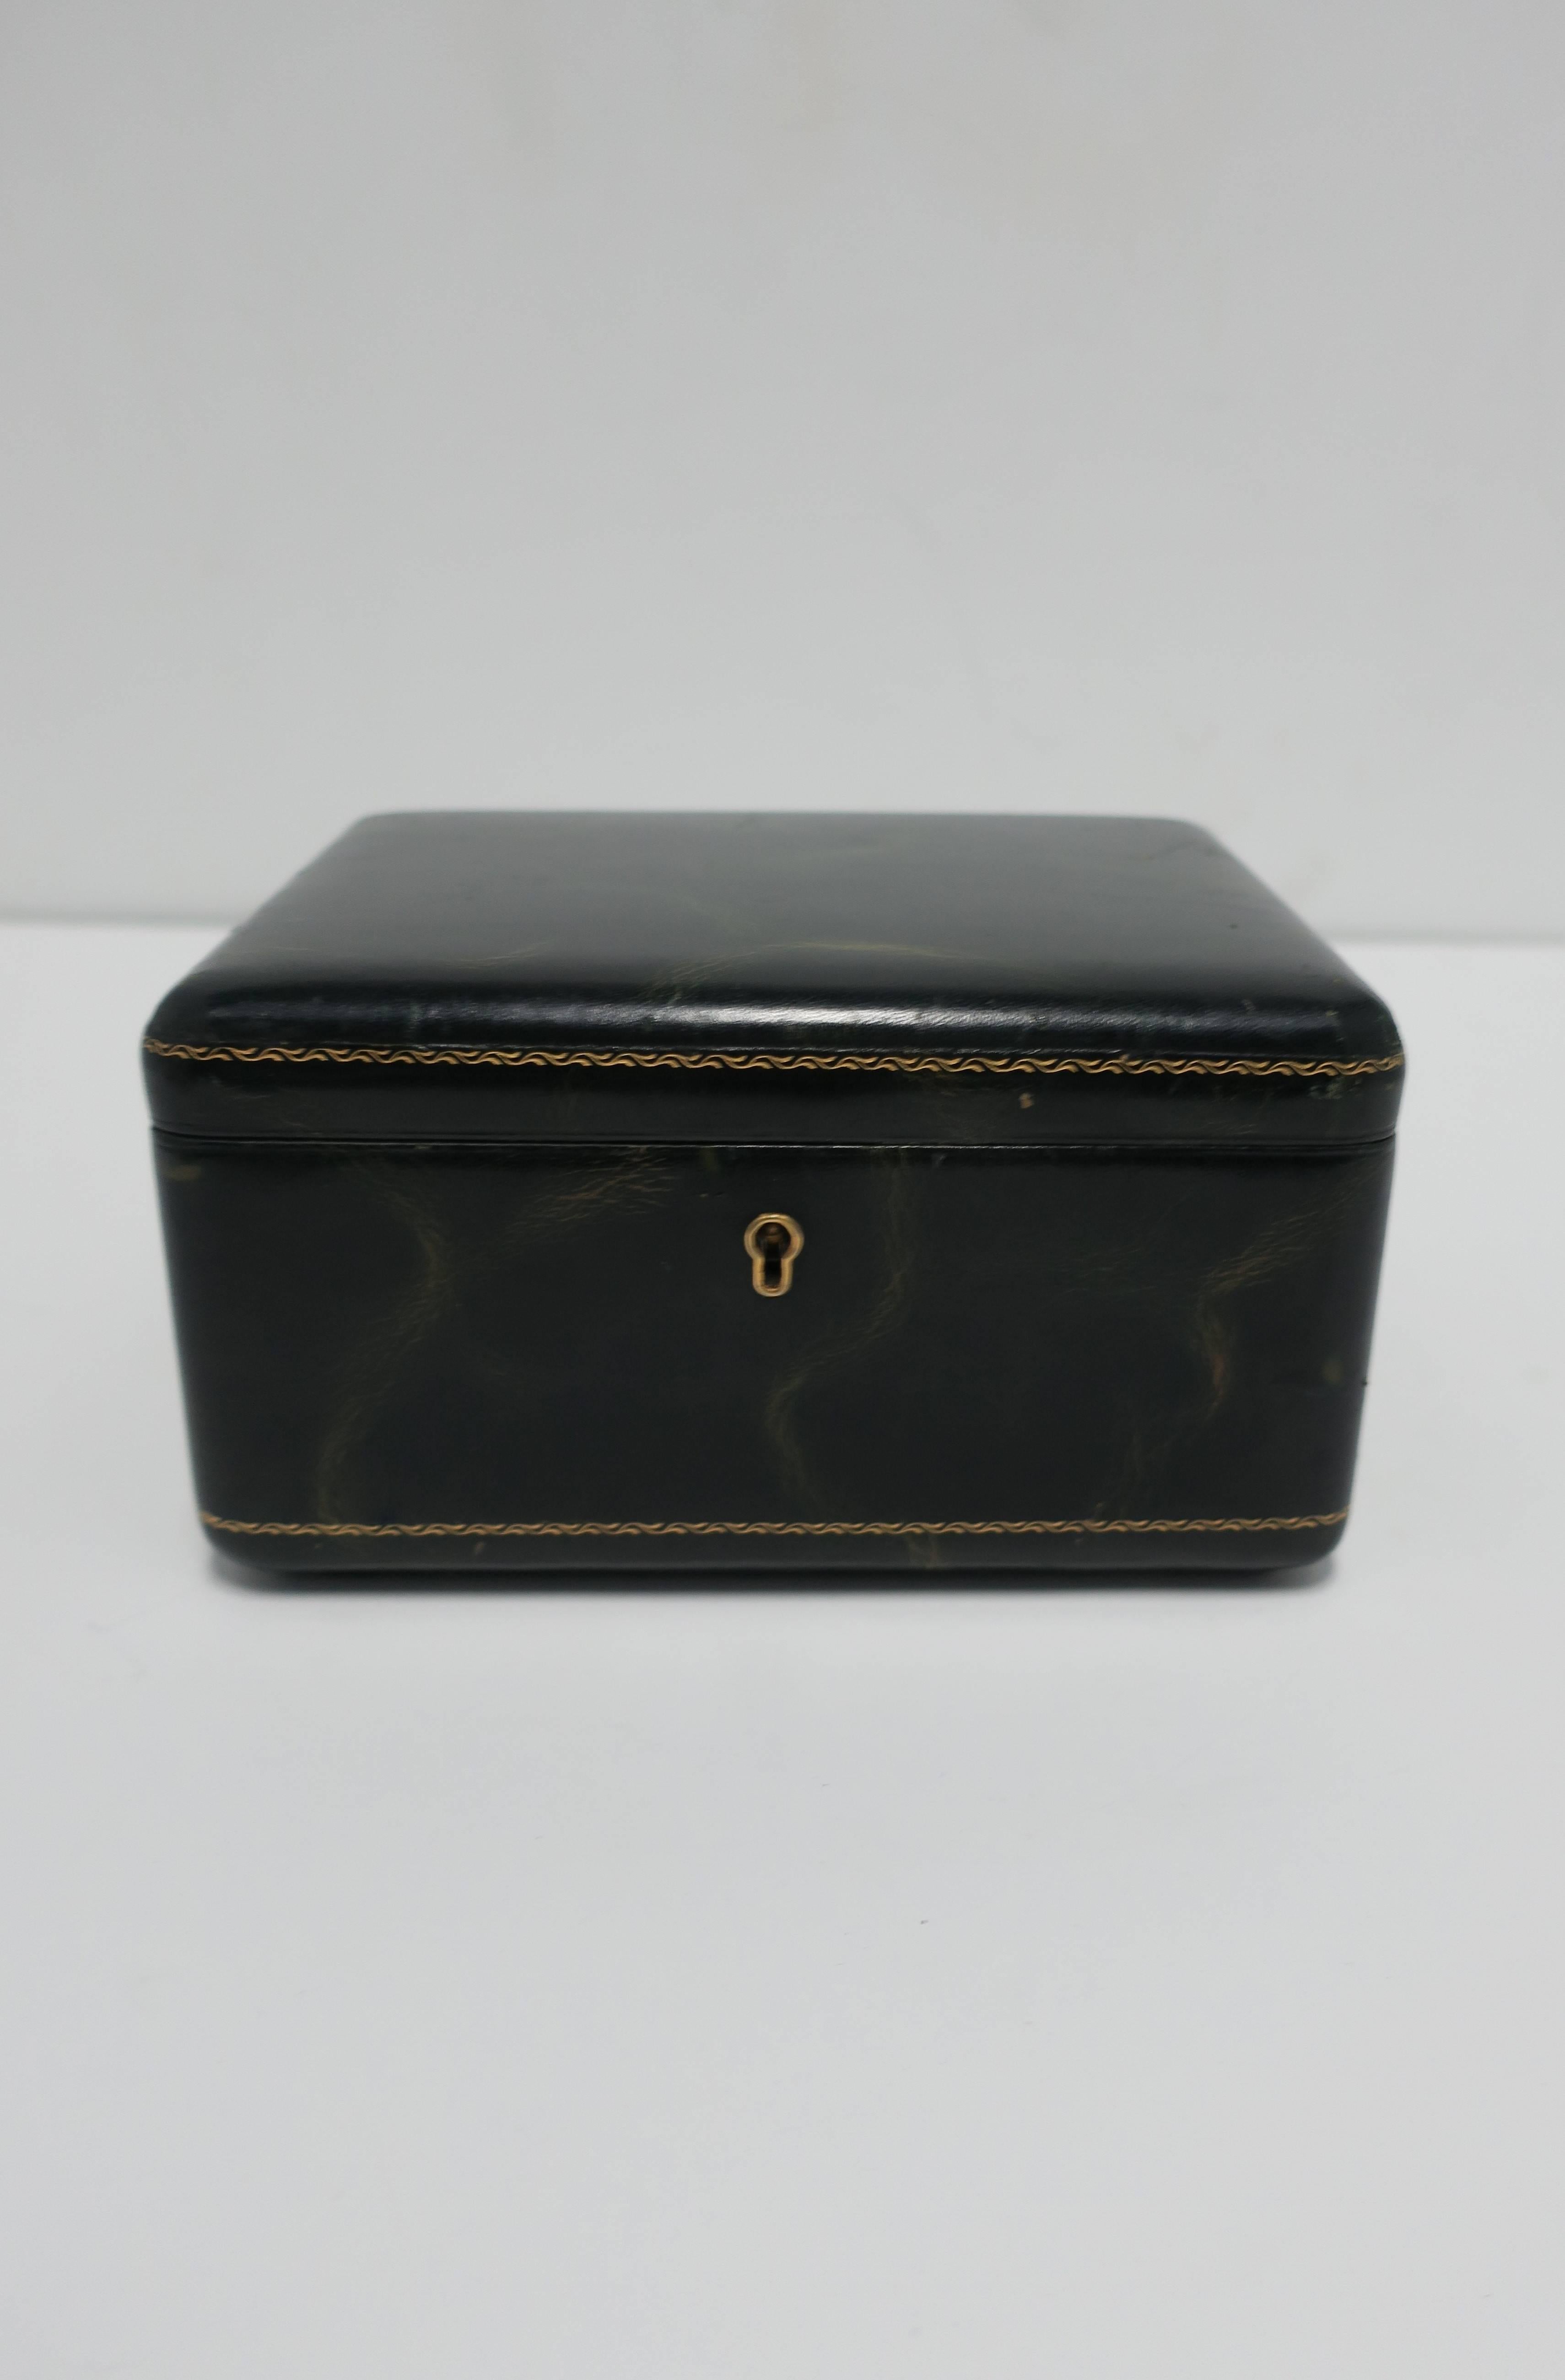 A beautiful Midcentury dark green leather jewelry box with removable tray. This dark green leather box has beautiful gold embossing around and brass keyhole detail on front. Inside, piece is upholstered in a gold/yellow material. Box is large enough